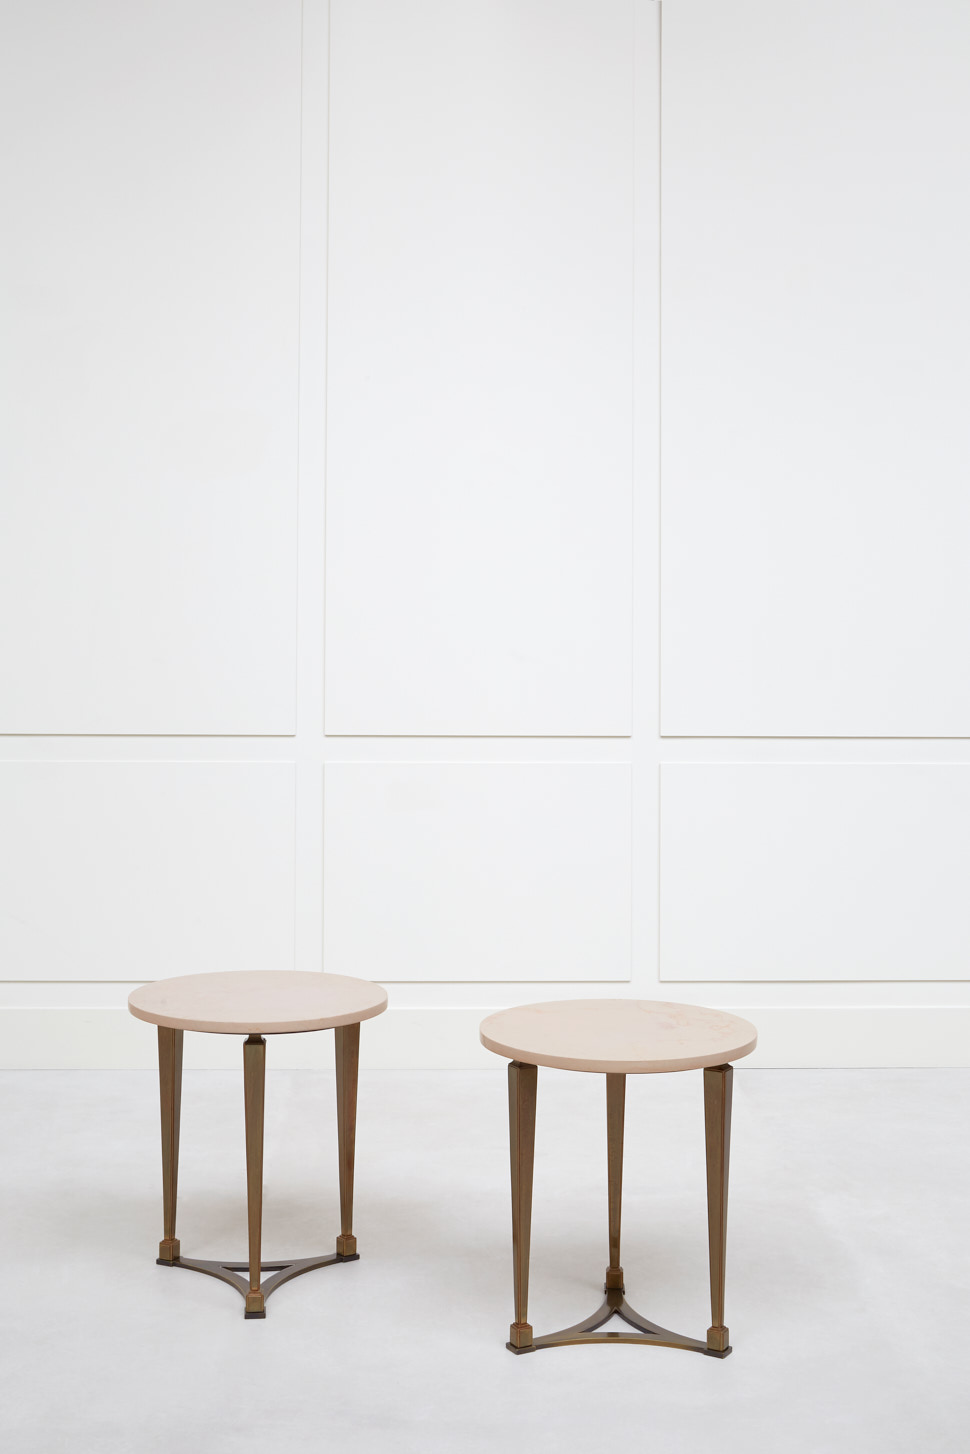 Jacques Quinet, Pair of side tables, vue 01